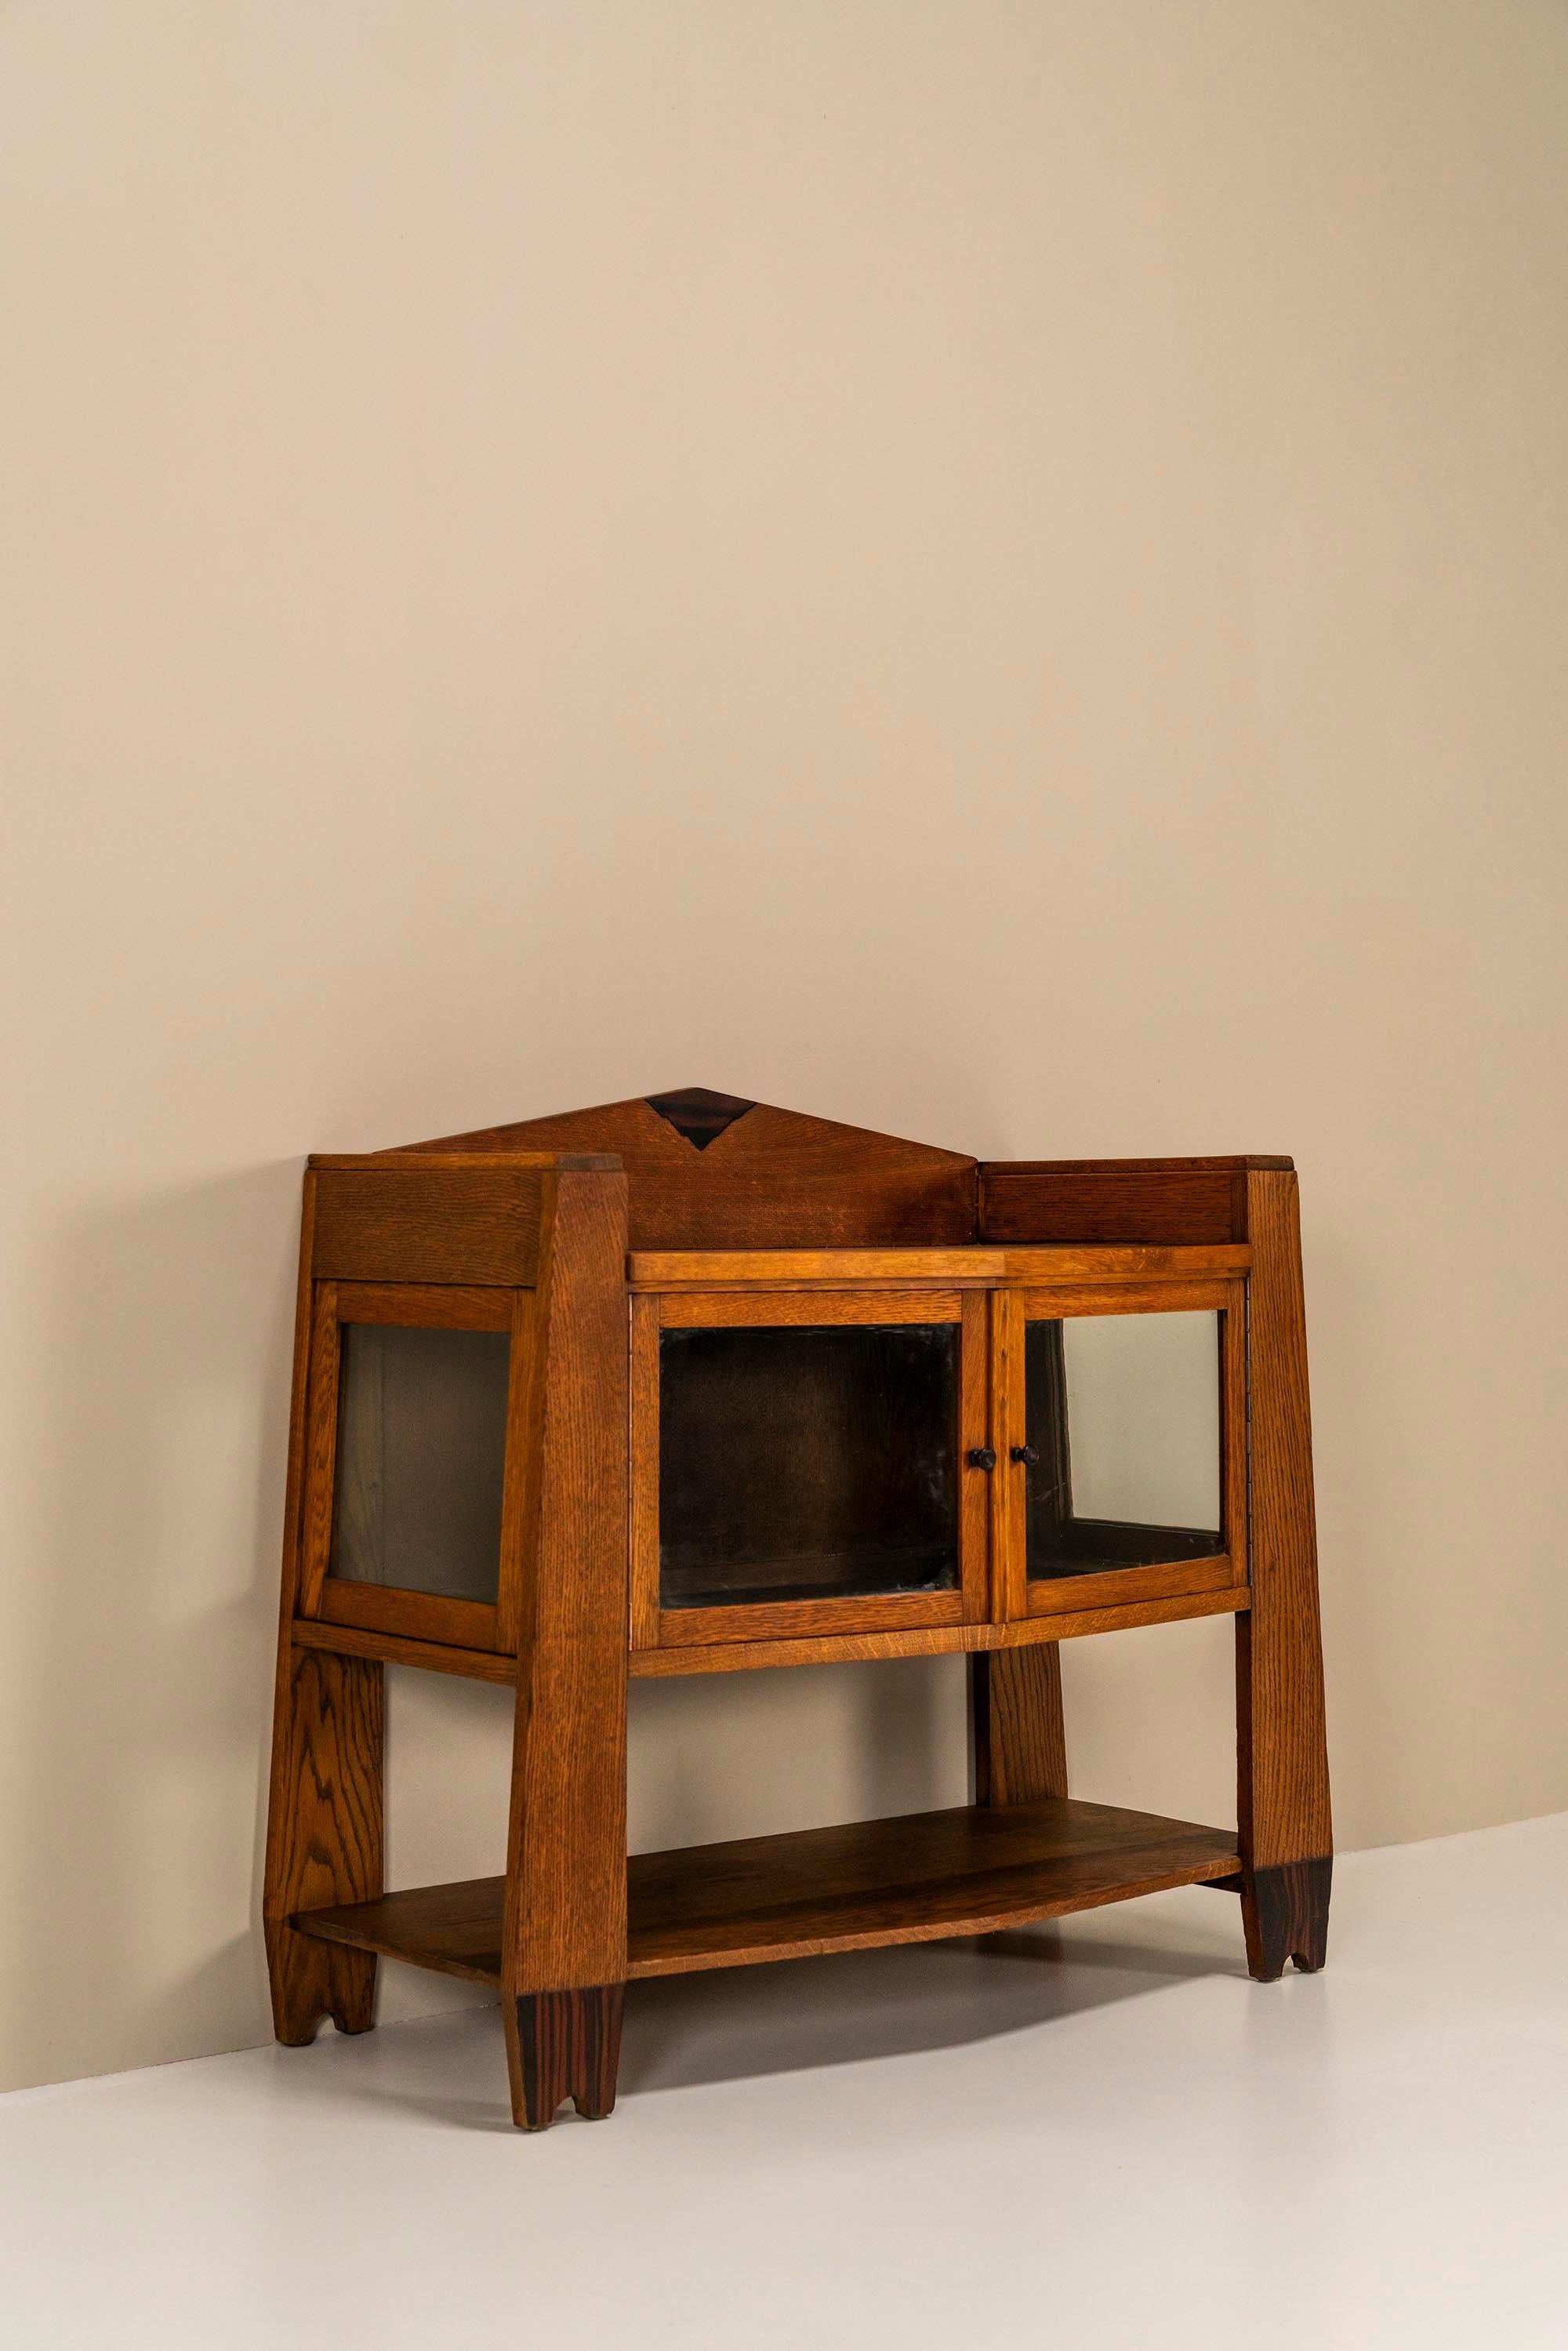 Amsterdamse School Cabinet In Oak And Macassar, Netherlands 1930s For Sale 2